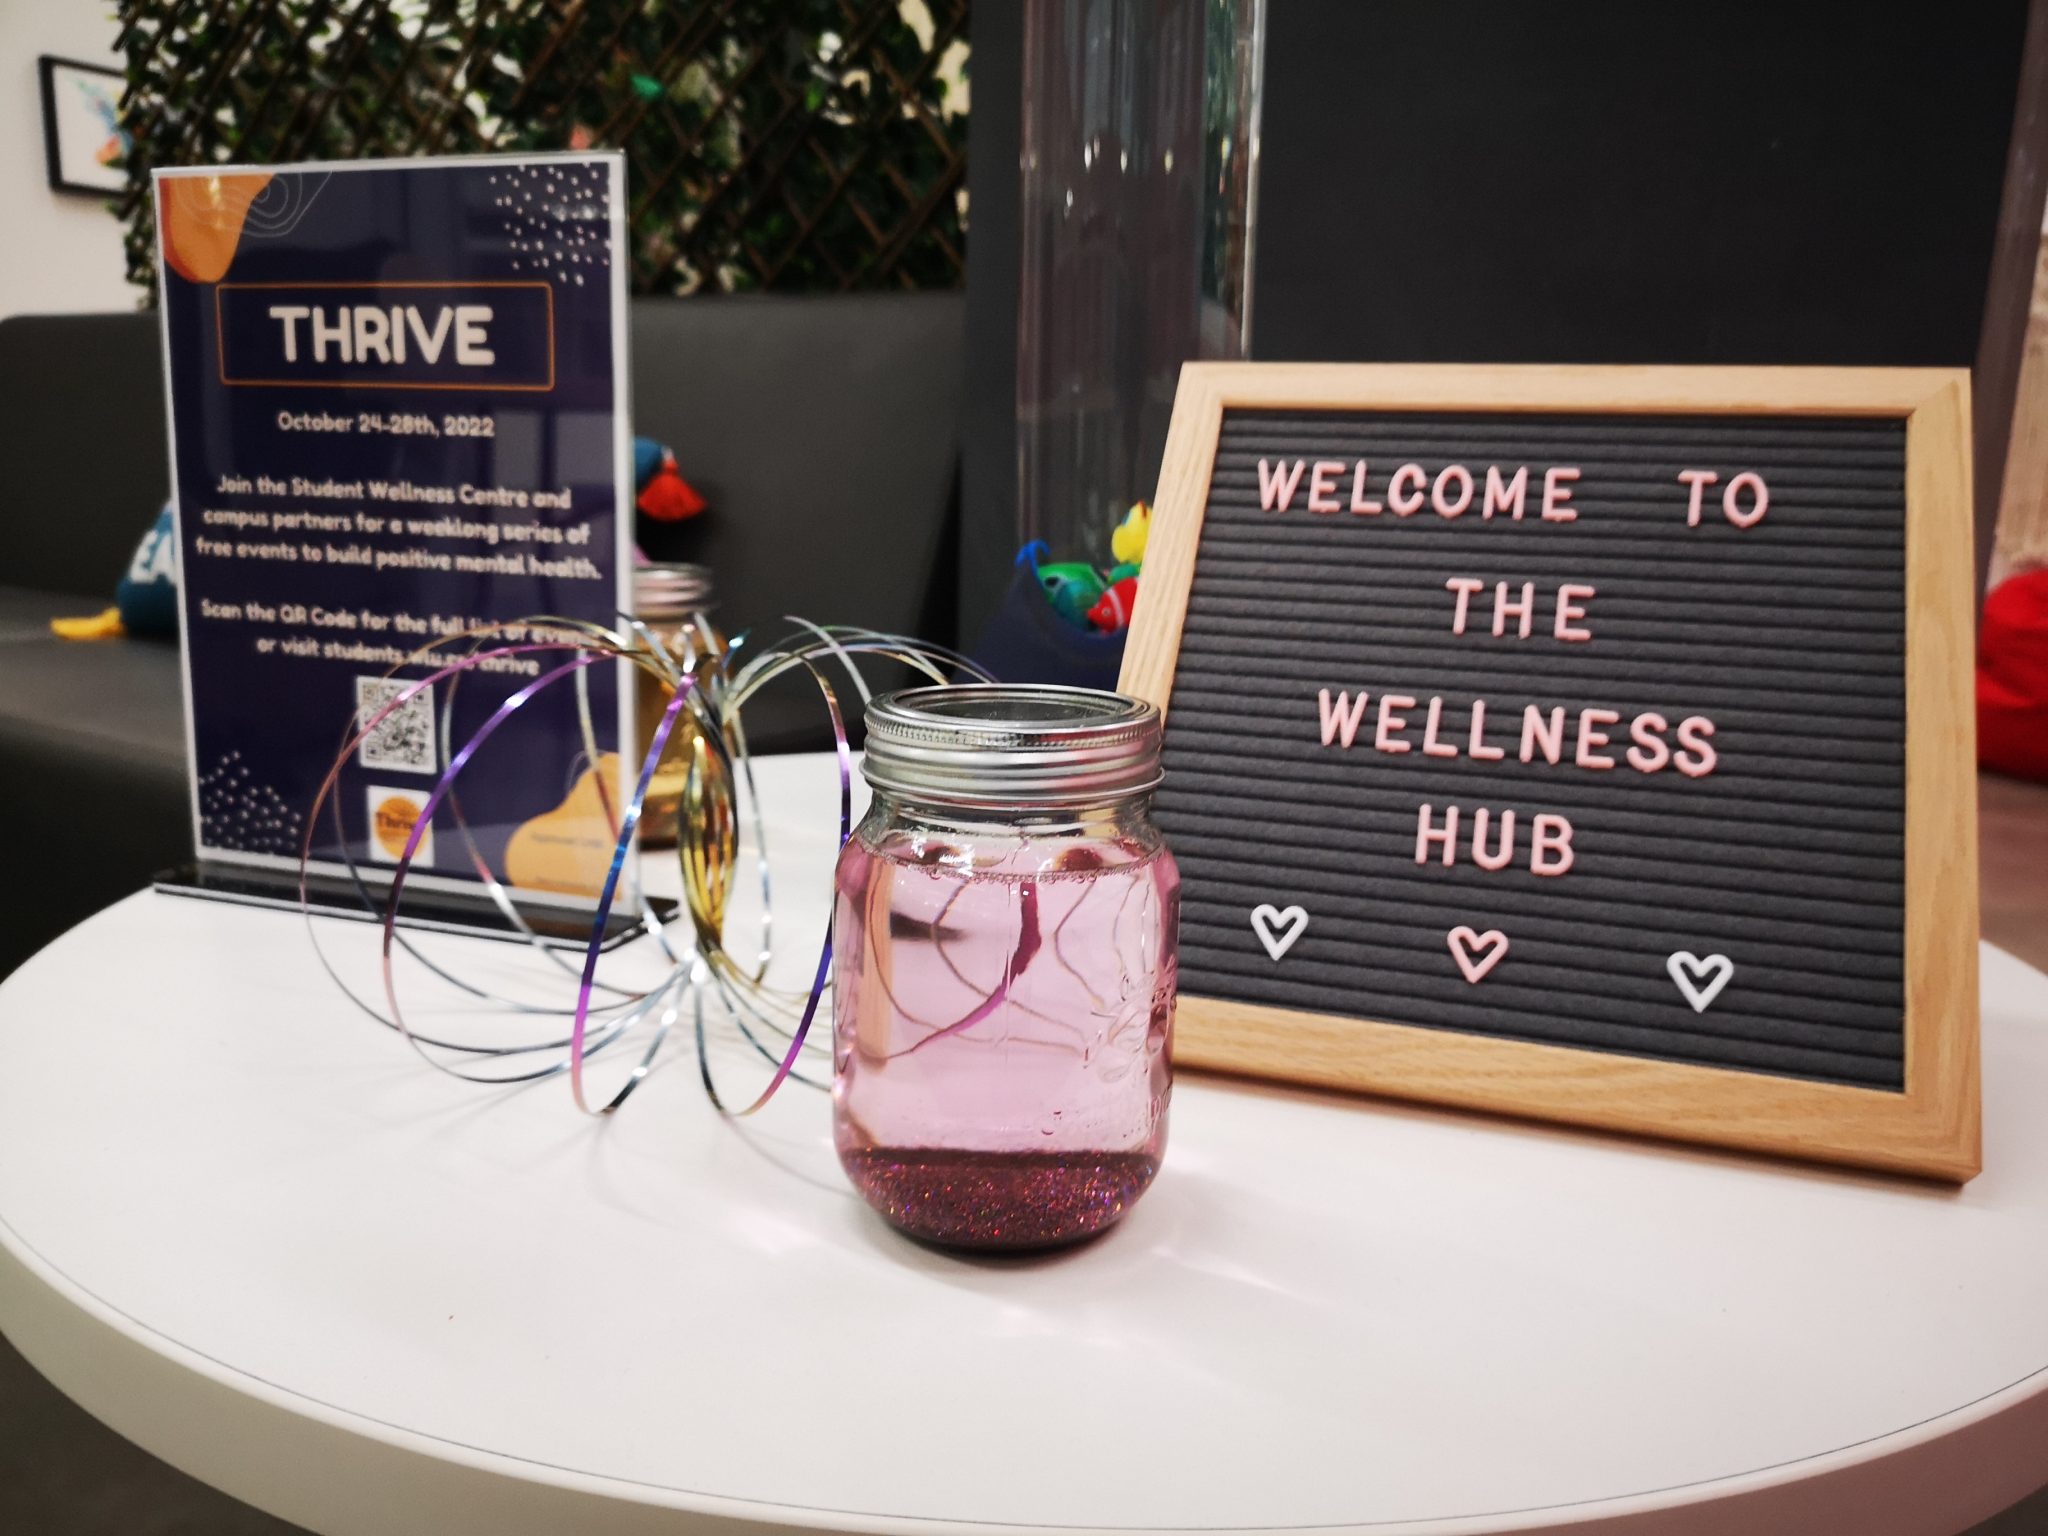 A letter board reading welcome to the wellness hub, and a jar with glitter settled at the bottom